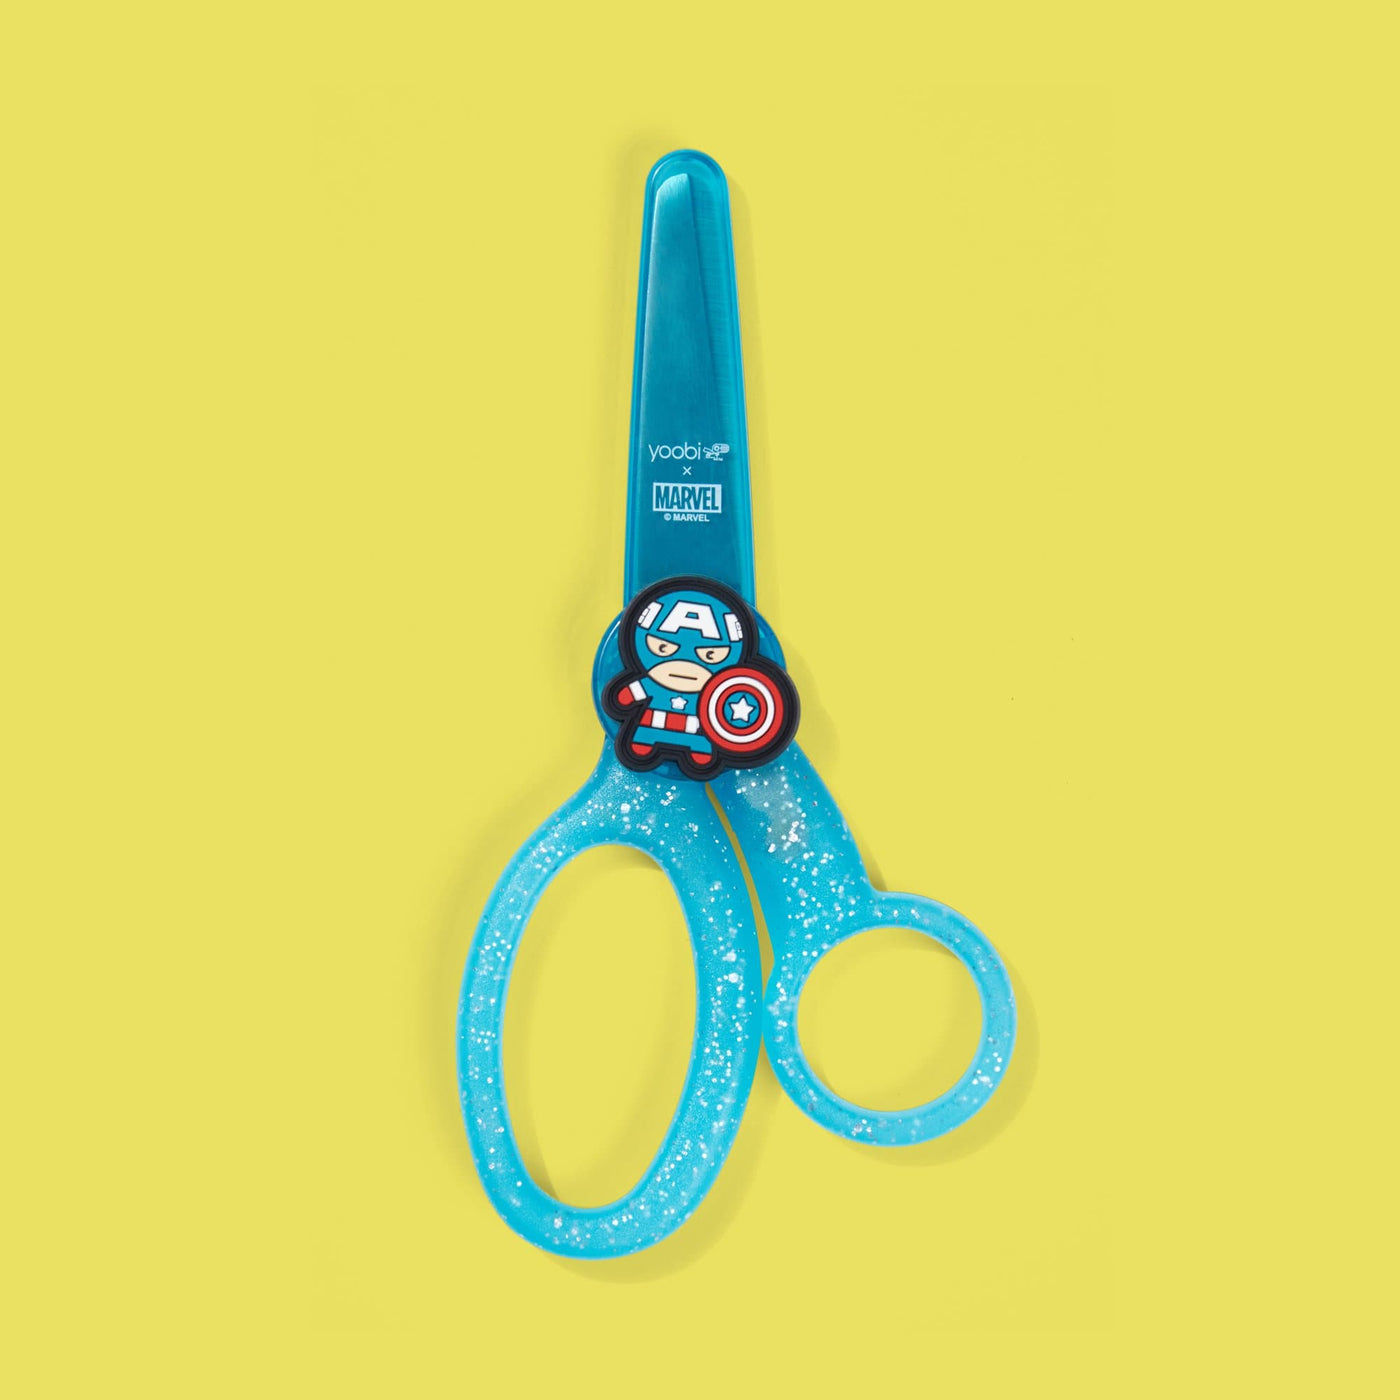 Captain America kids scissors with blue glitter handle and blade cover with Captain America charm